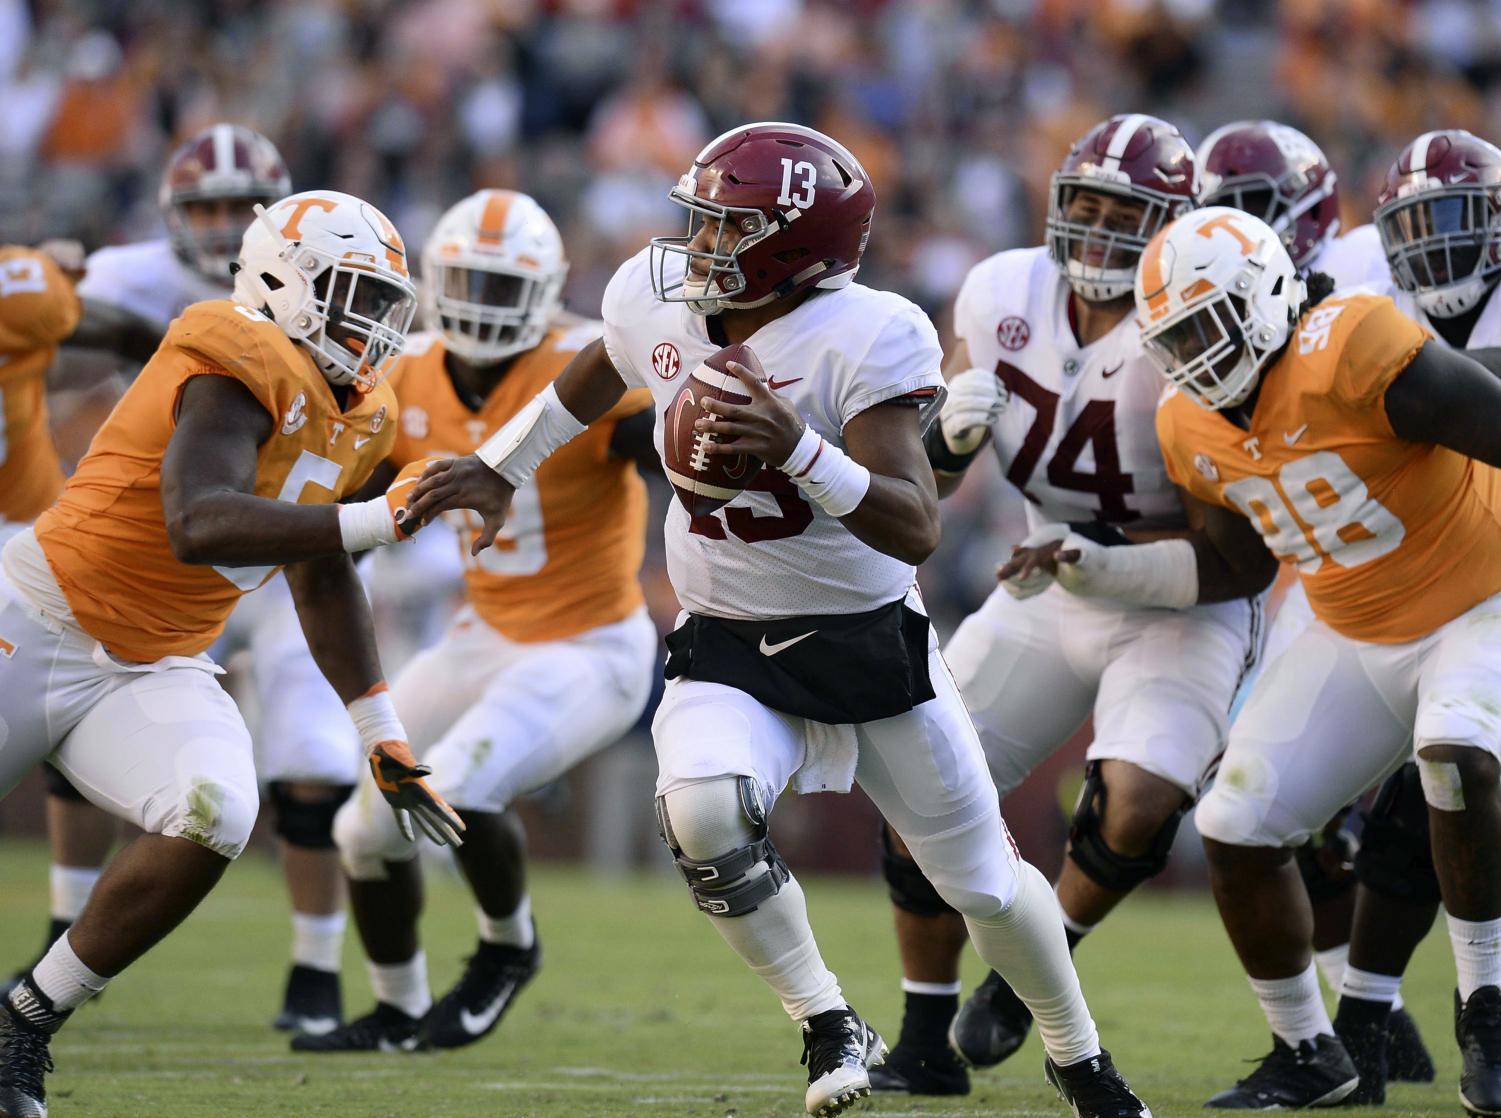 Fast+start+helps+No.+1+Alabama+trounce+Tennessee+58-21